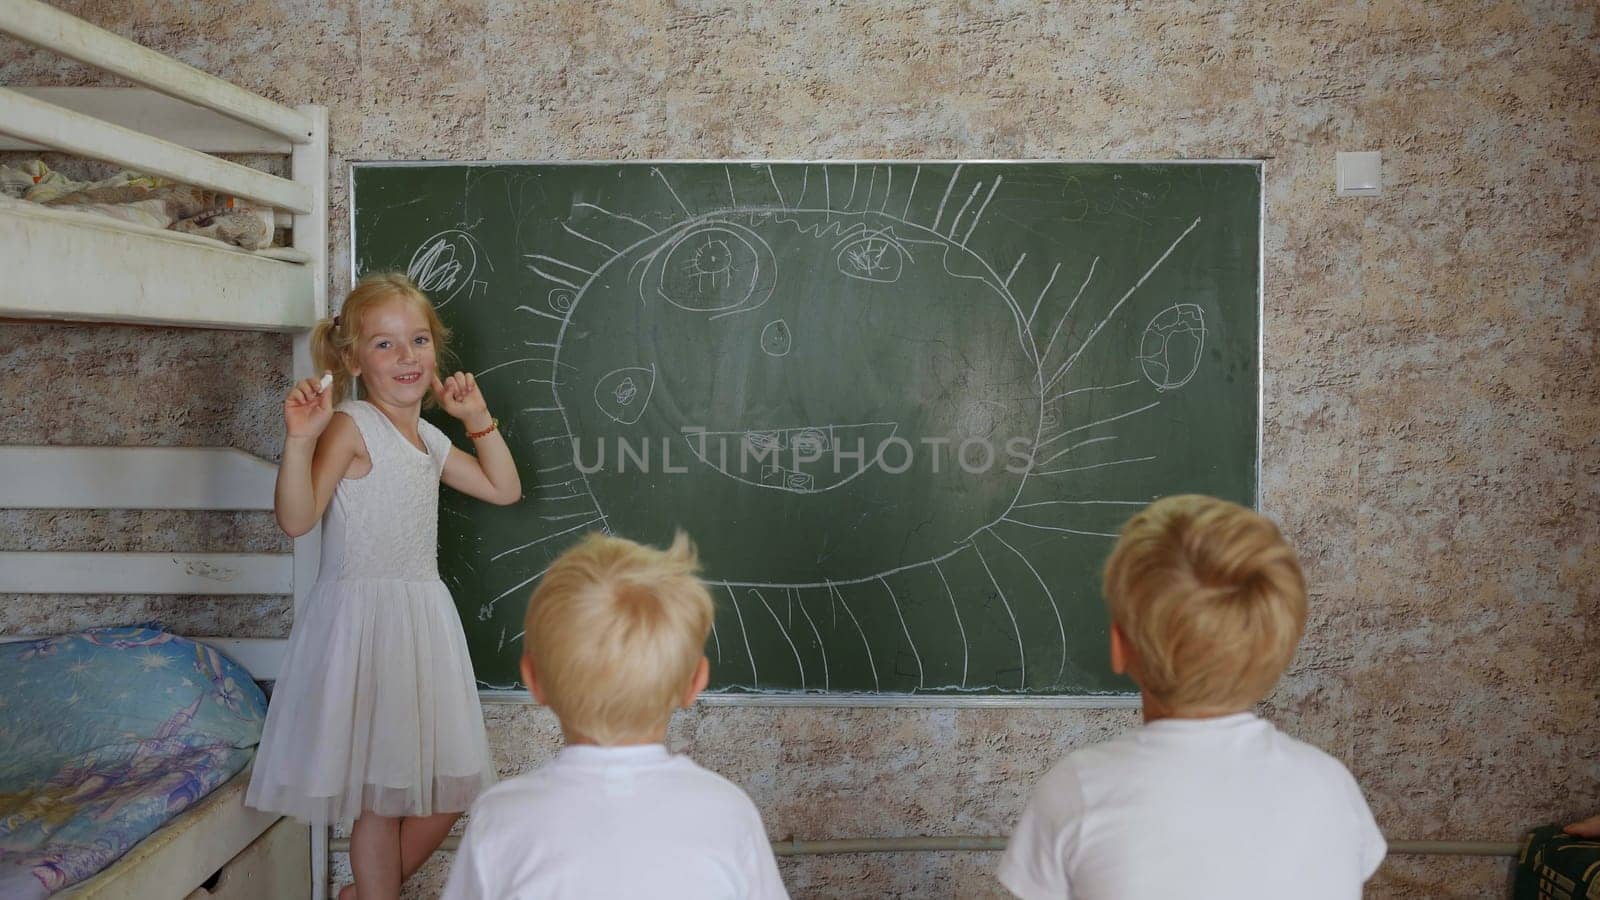 A six year old girl draws on a board in front of her brothers